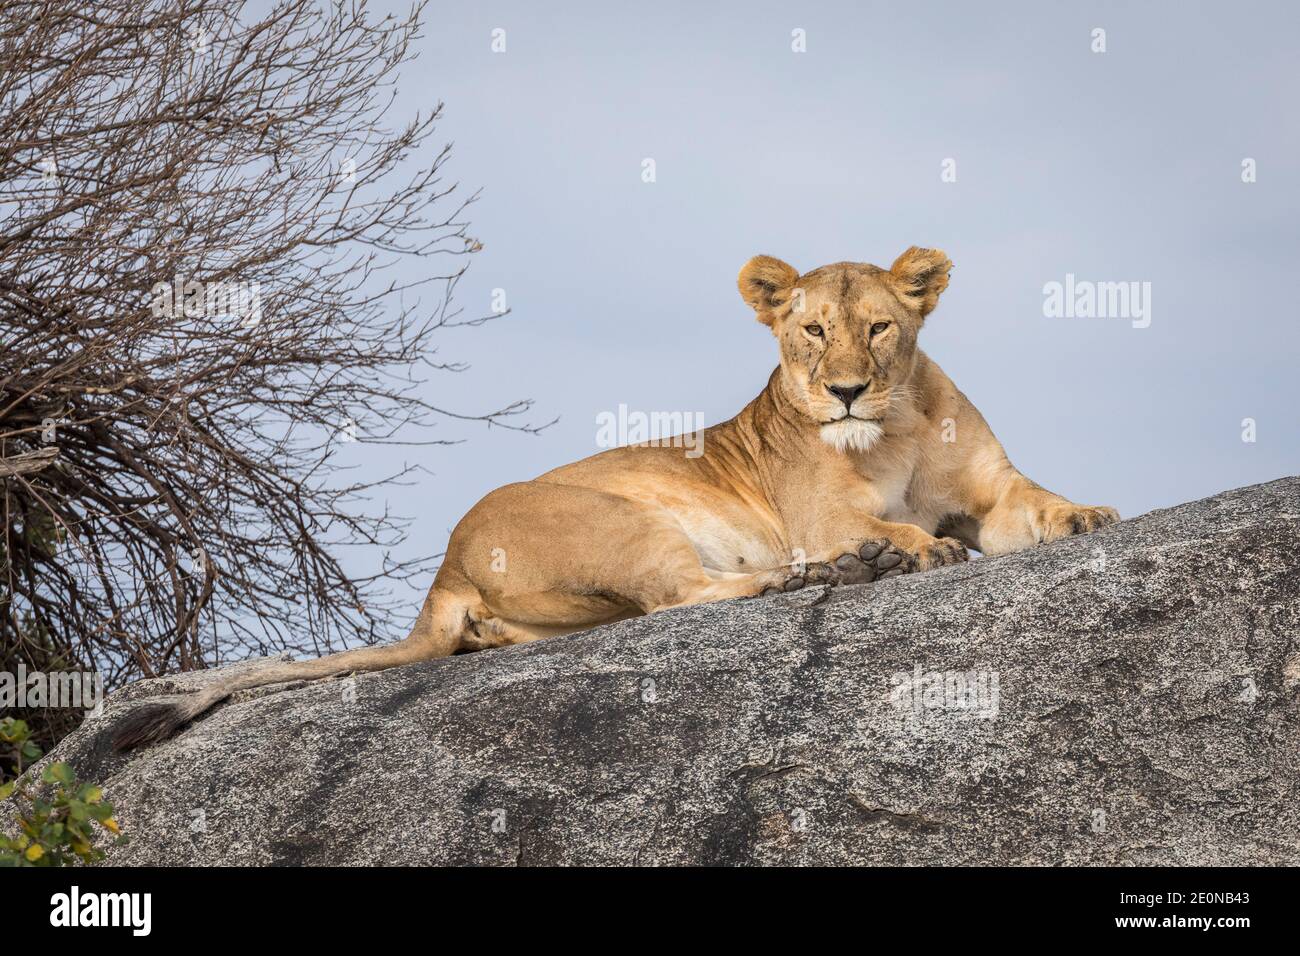 Adult lioness with flies on her face lying on a large rock looking straight at camera in Serengeti National Park in Tanzania Stock Photo